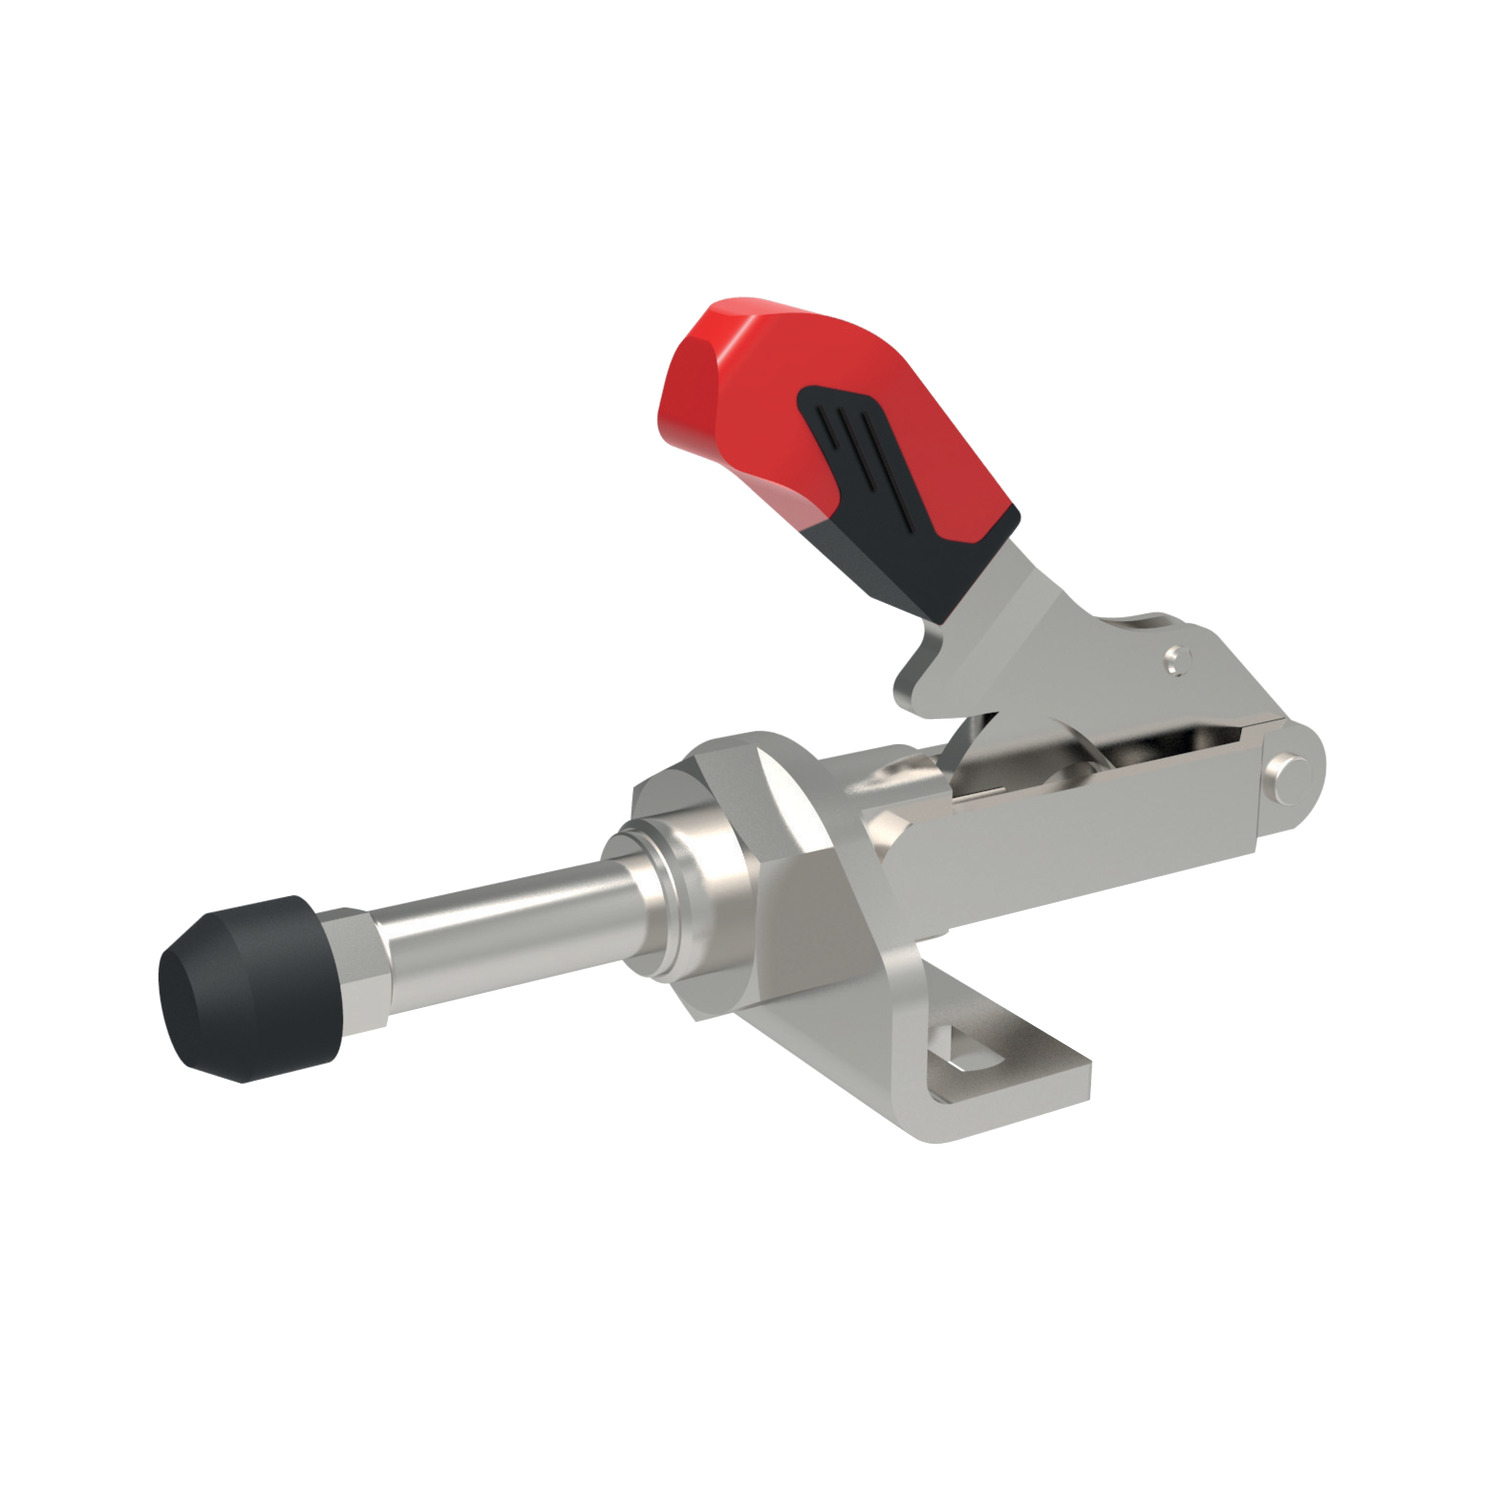 Stainless Steel Push-Pull Type Toggle Clamps Fully stainless steel versions of our push-pull toggle clamps. Supplied with appropriate stainless clamping screw and rubber nose.